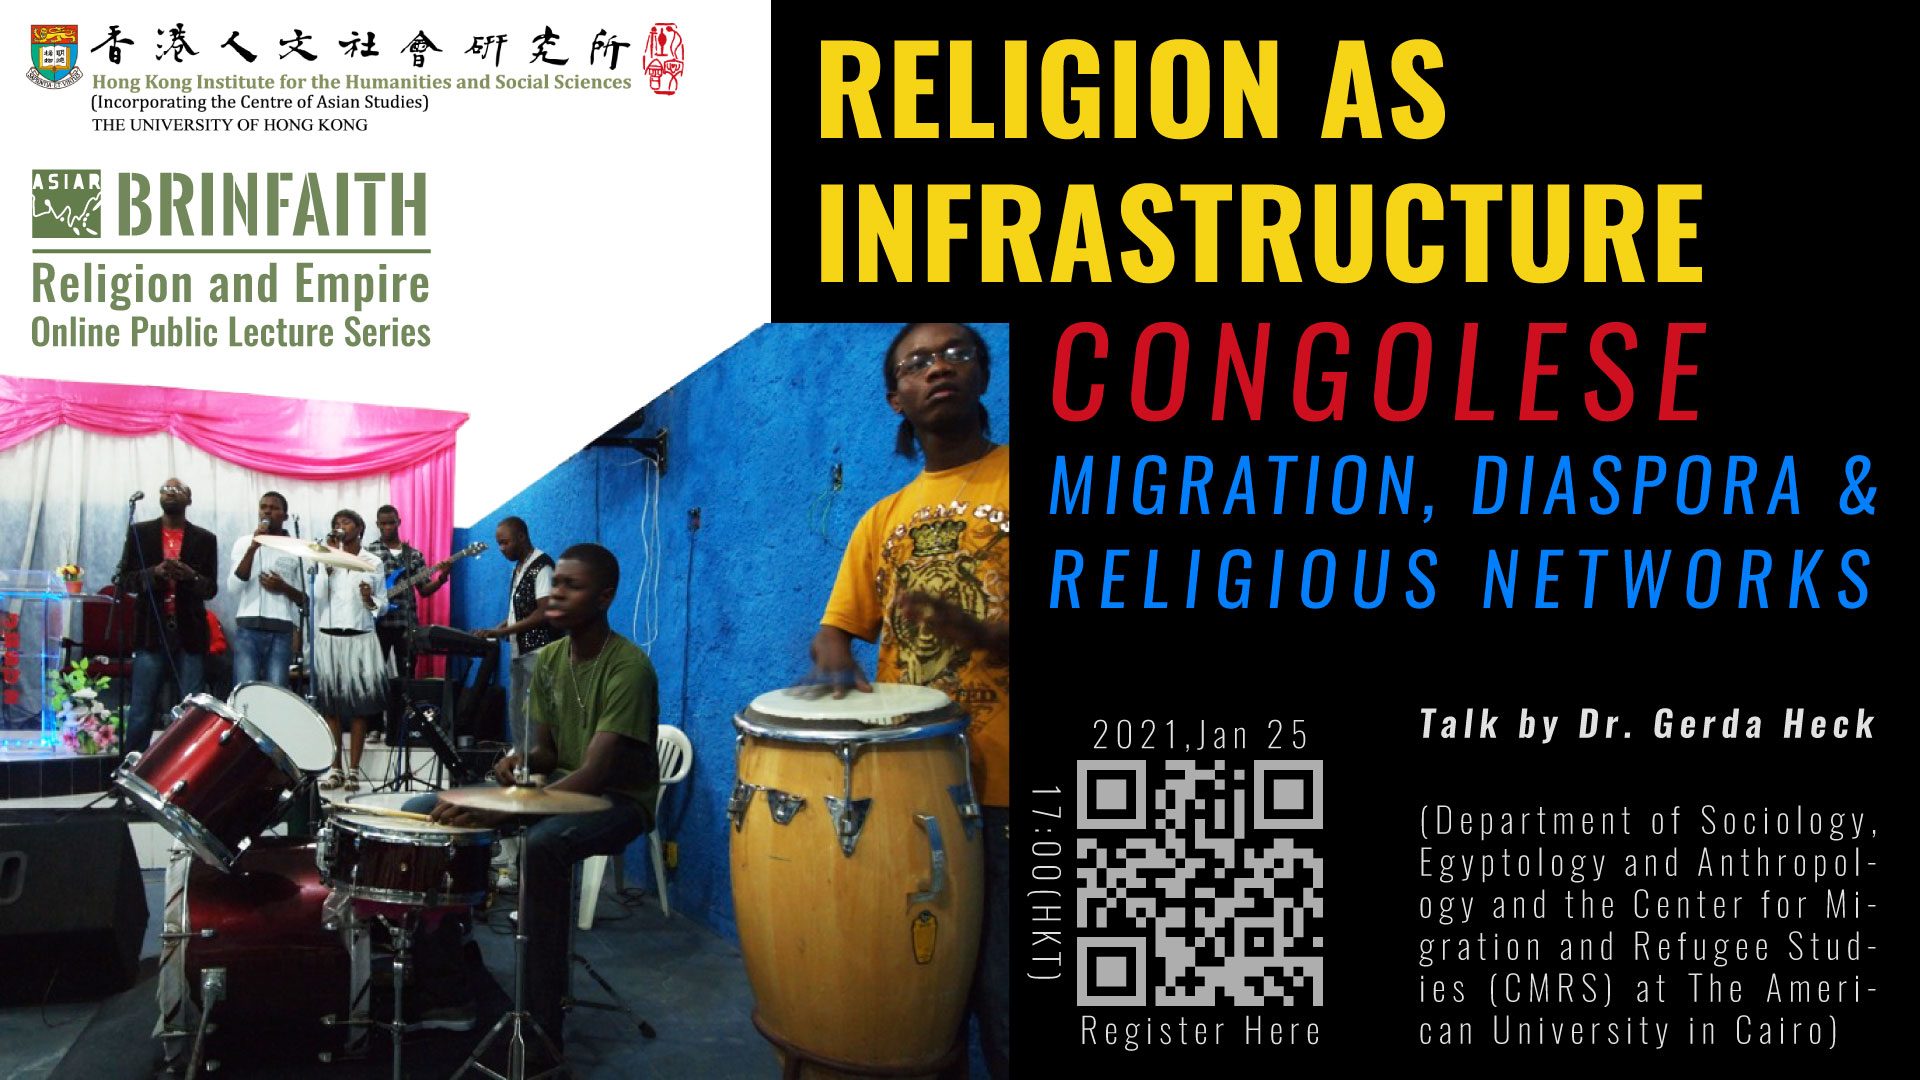 BRINFAITH Religion and Empire Lecture Series on “Religion as Infrastructure: Congolese Migration, Diaspora, and Religious Networks” by Dr. Gerda Heck (January 25, 2021)